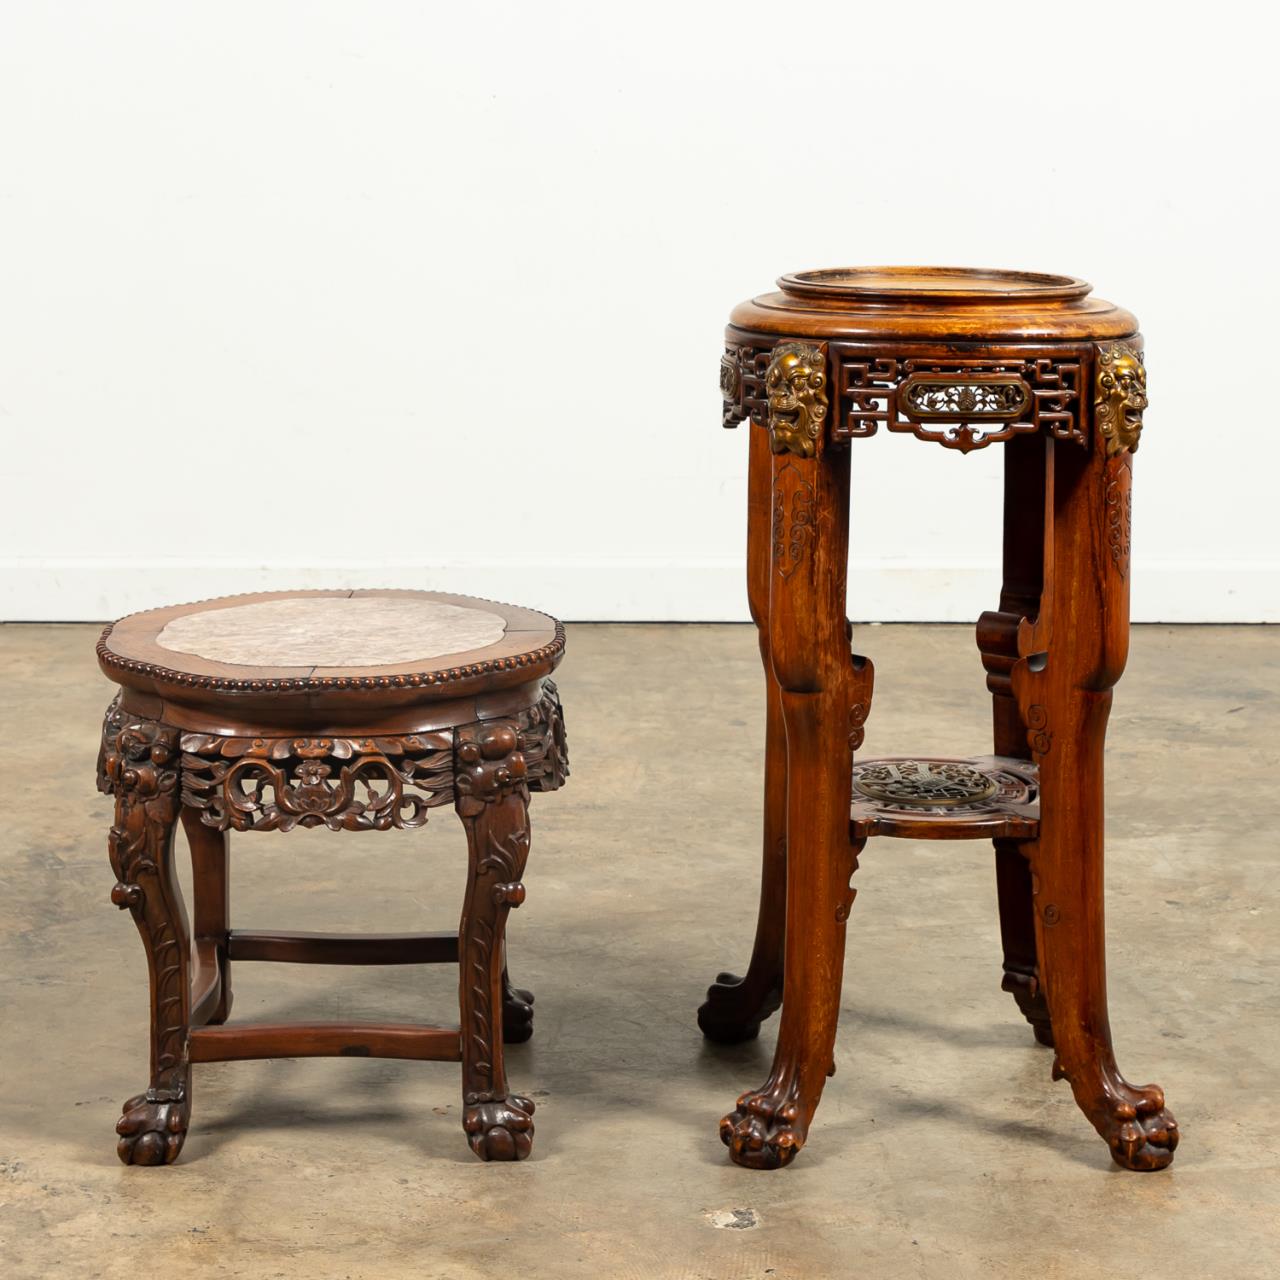 2 CHINESE CARVED HARDWOOD TABLES,